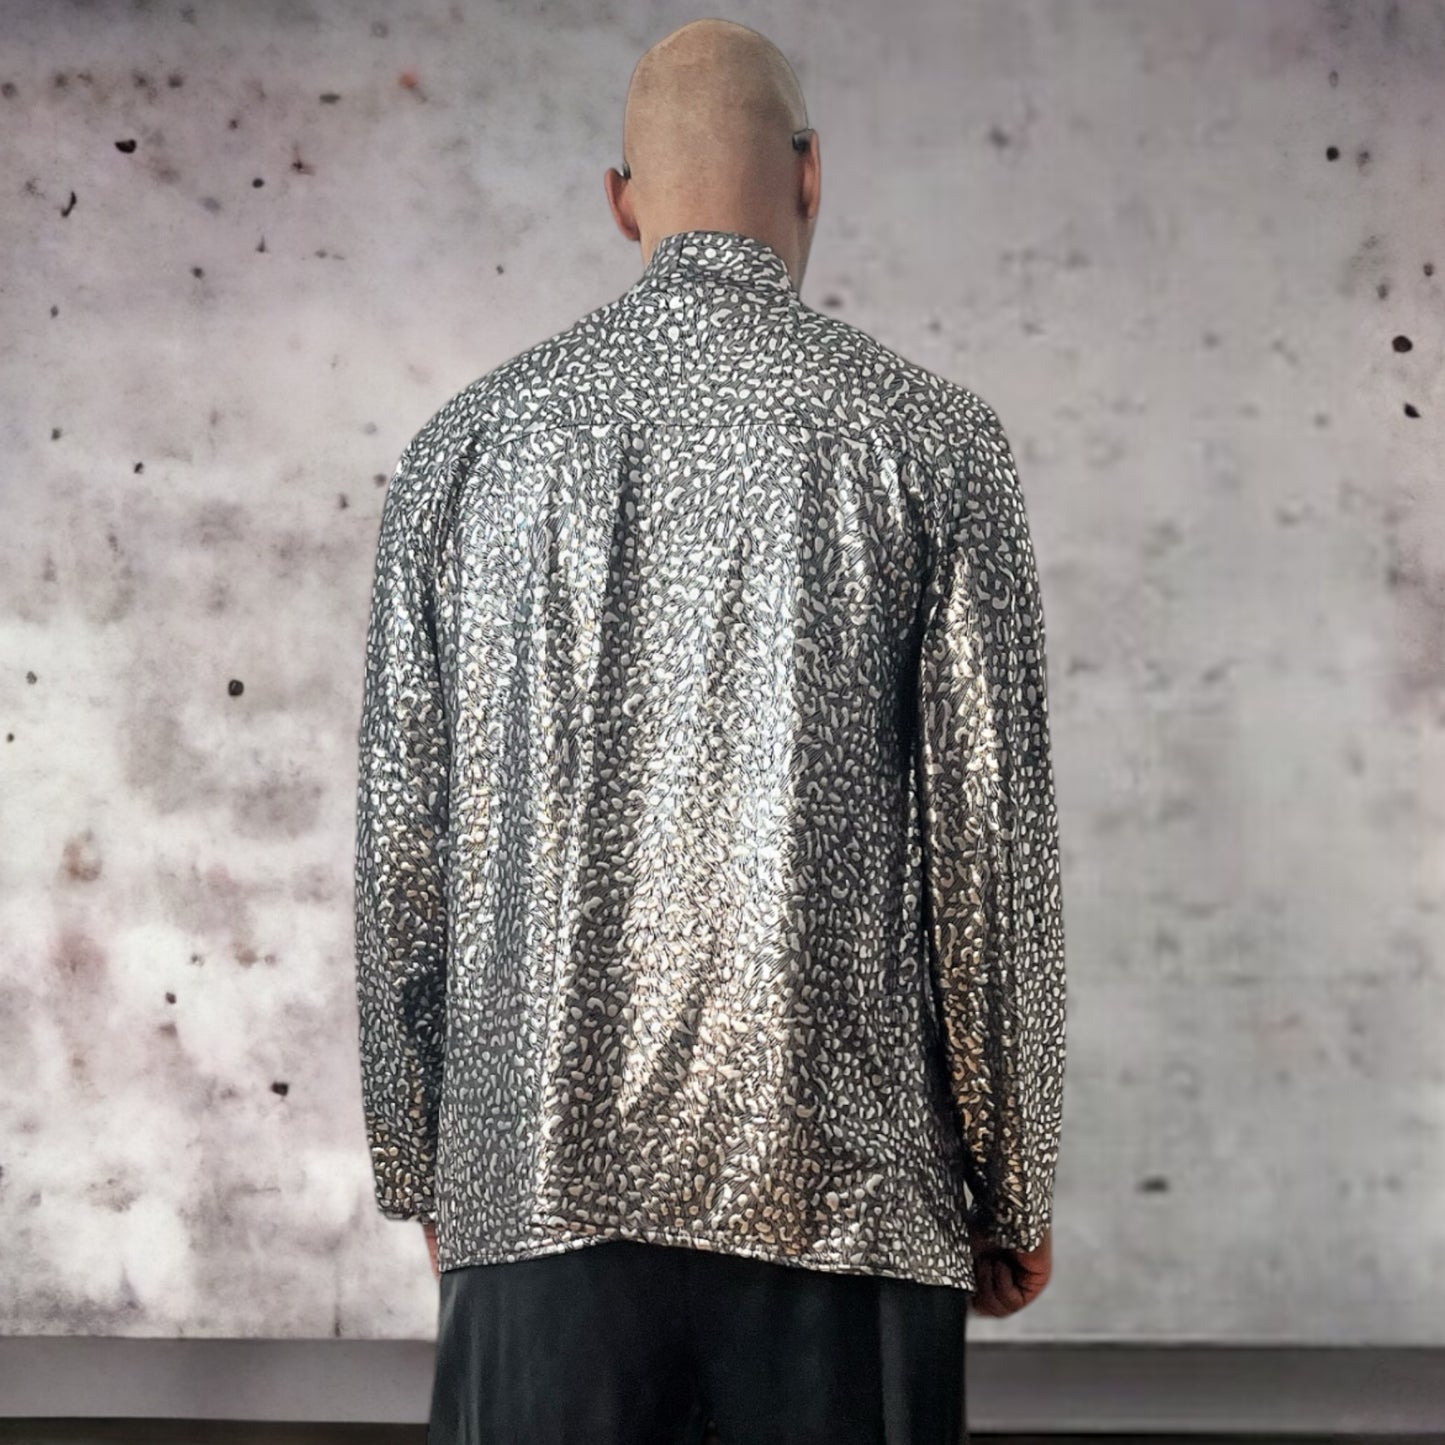 Silver Metallic Galaxy Cheetah Print Mens Kimono Shirt Jacket Perfect For Night Out DJ Outfit Festival Wear | Long Sleeve Tie Front